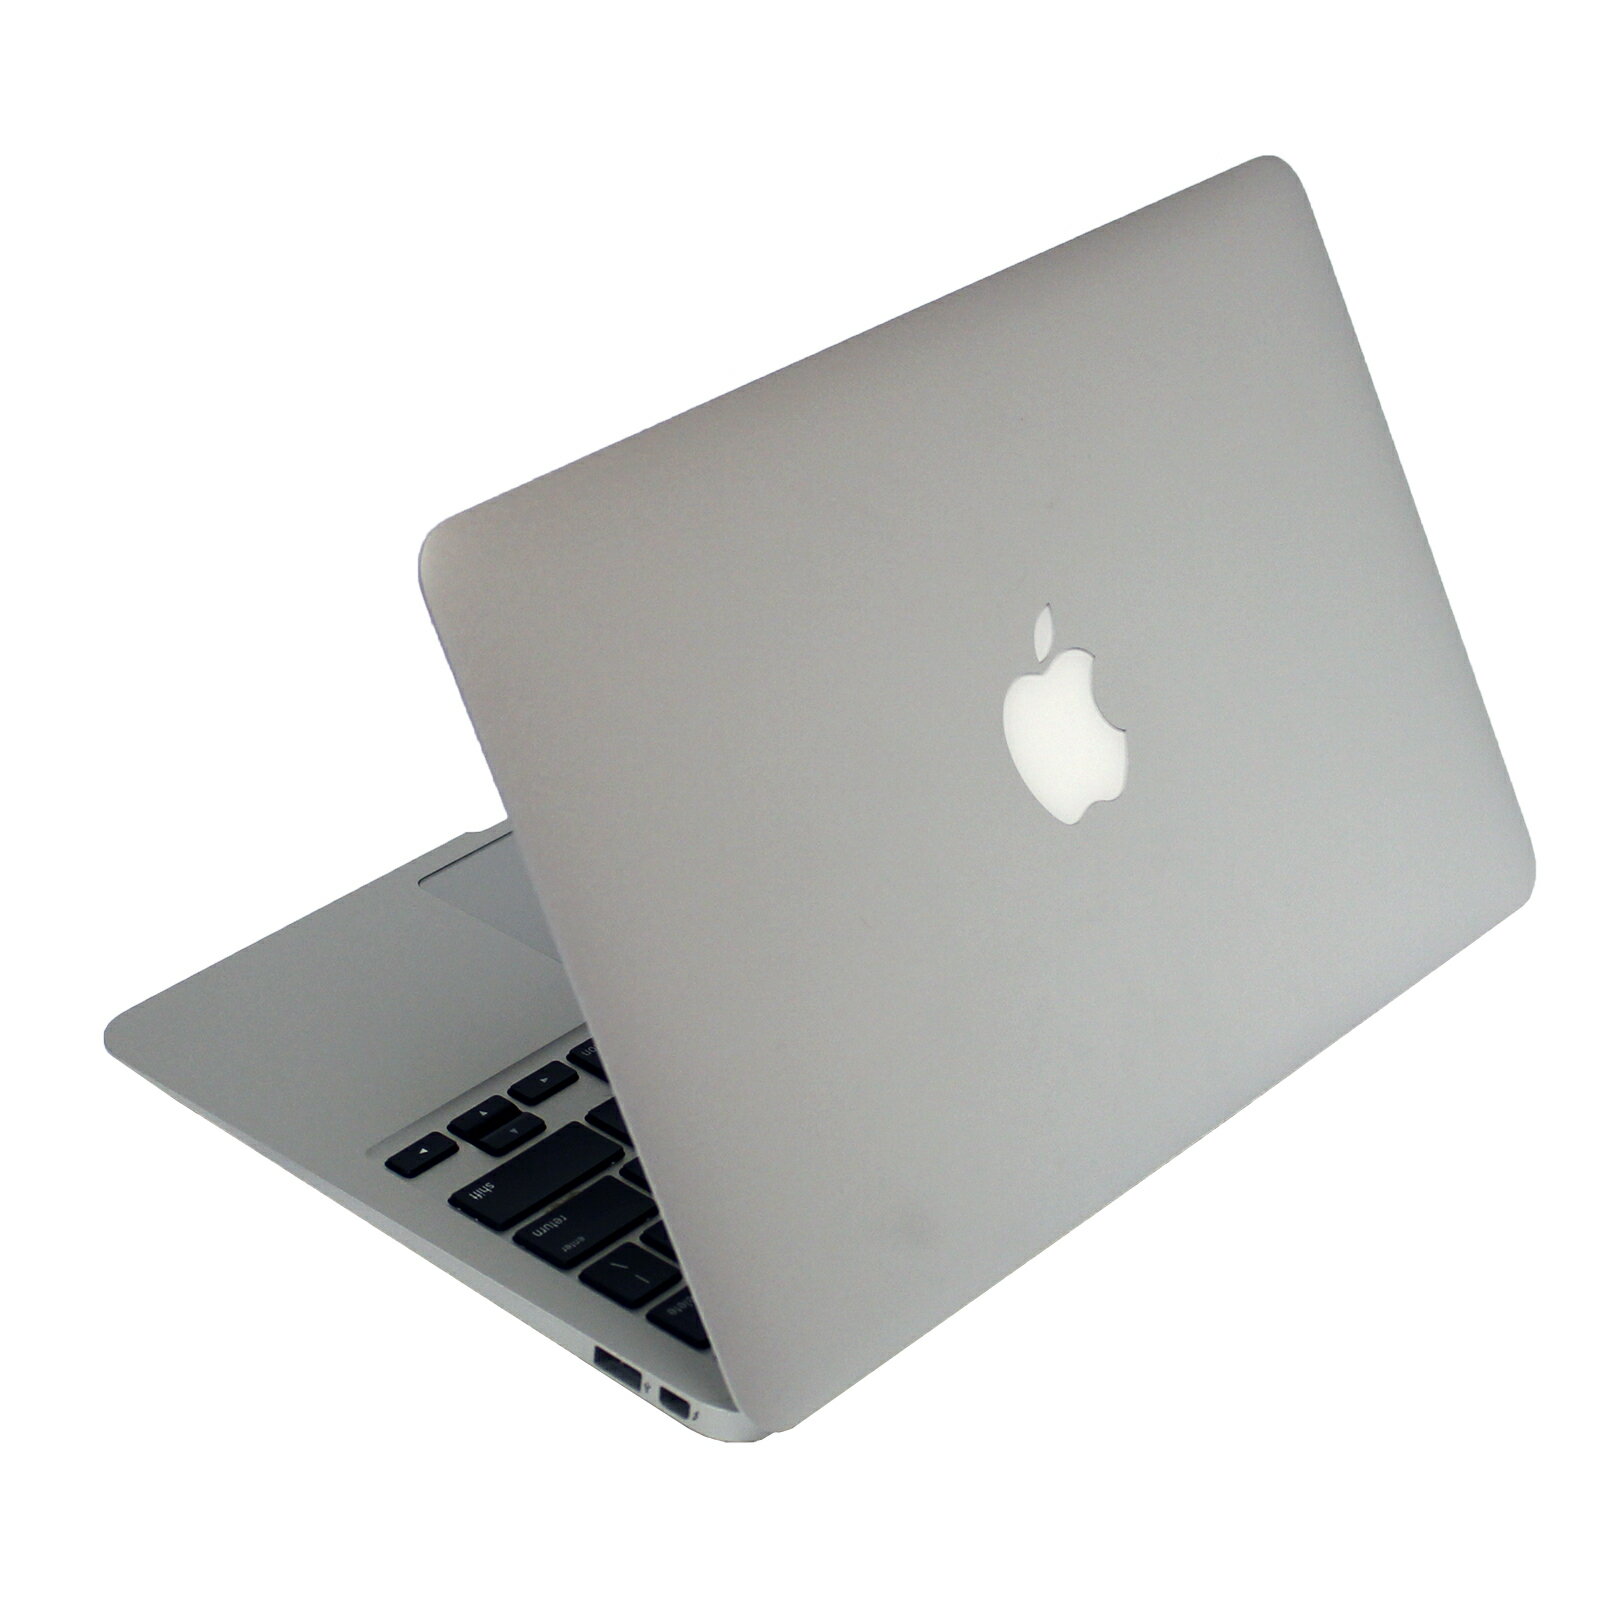 what is the latest os for macbook air mid 2011